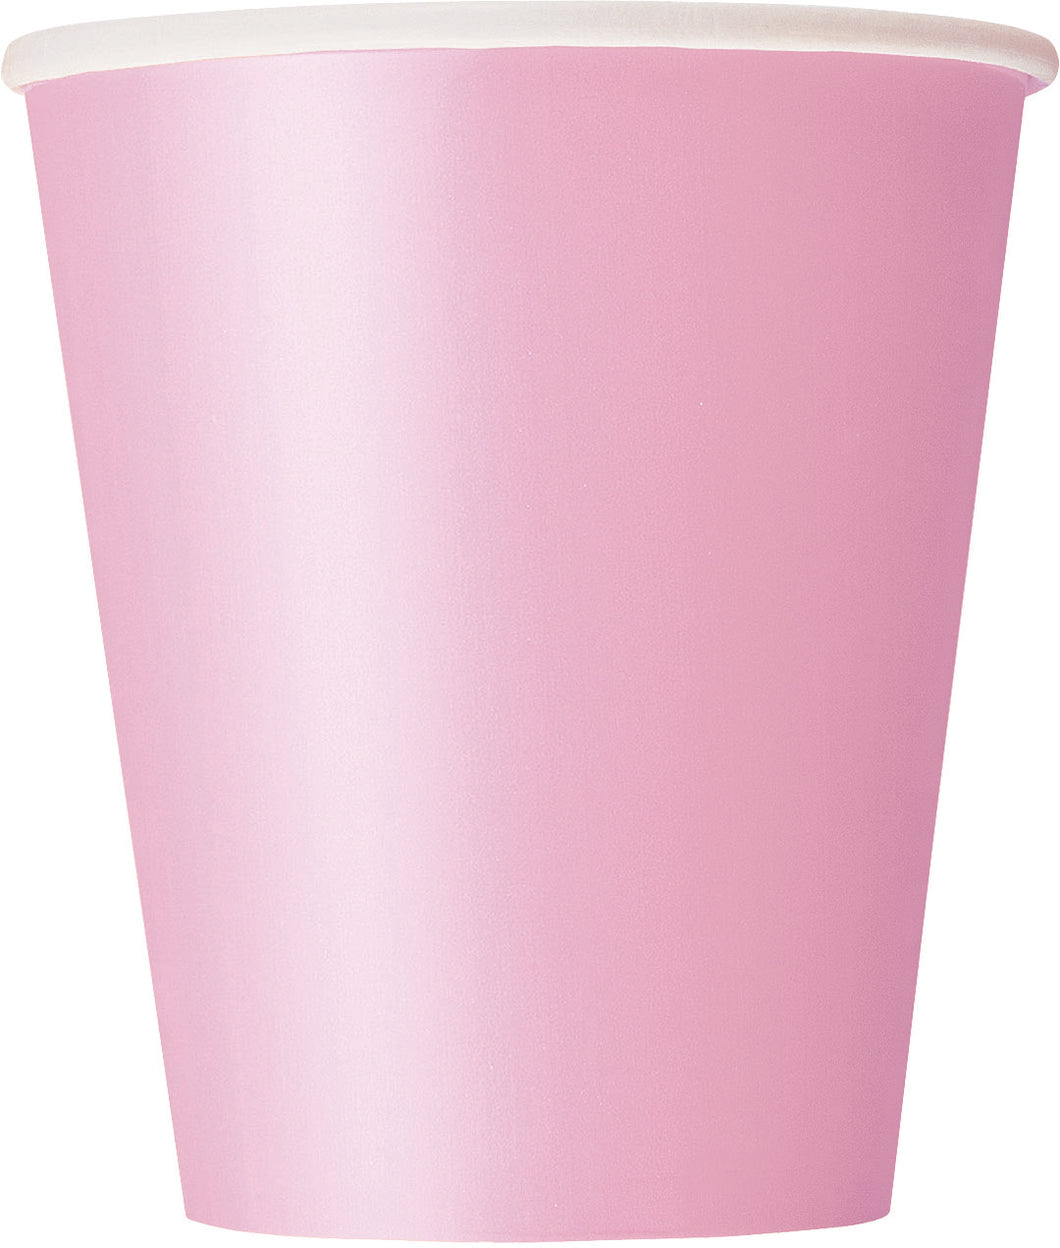 LOVELY PINK 8 x 9oz PAPER CUPS